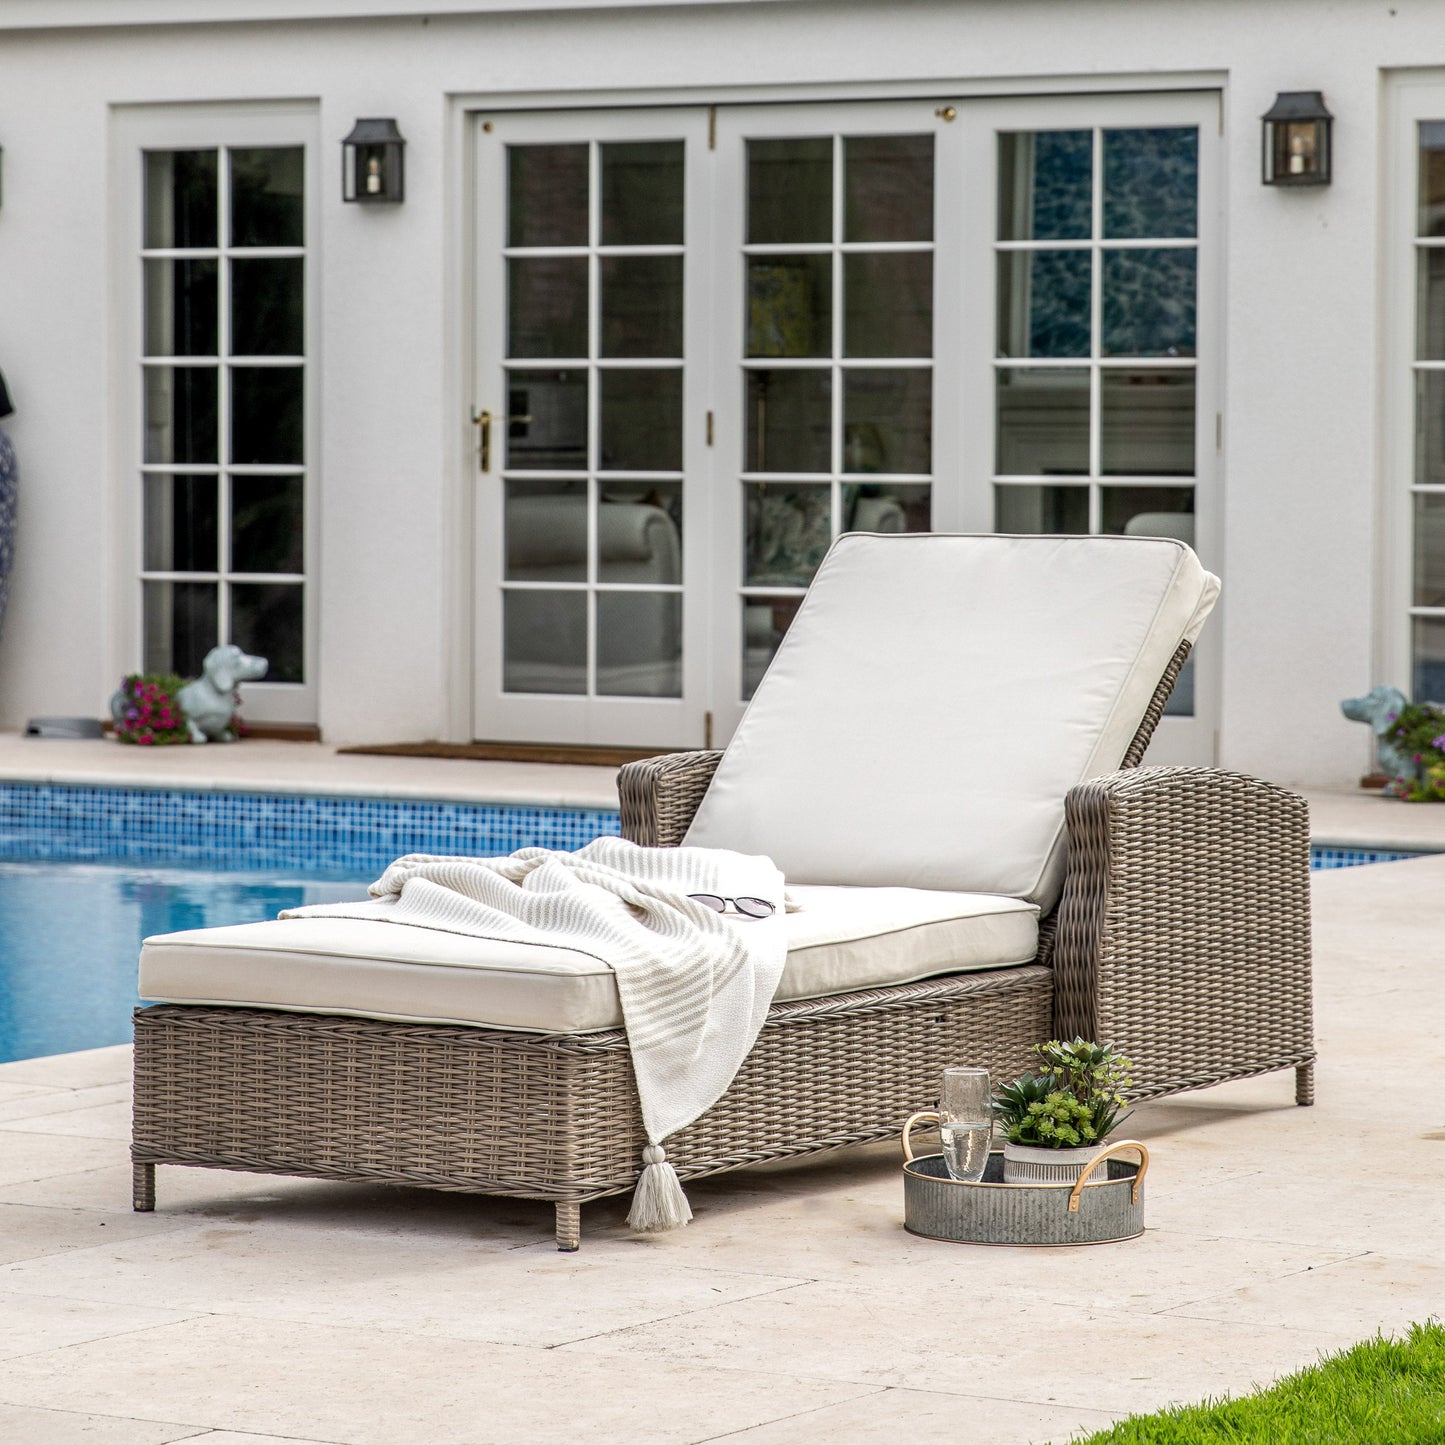 A Bigbury Sunlounger Natural by Kikiathome.co.uk, an interior decor addition for home furniture, placed alongside a pool.